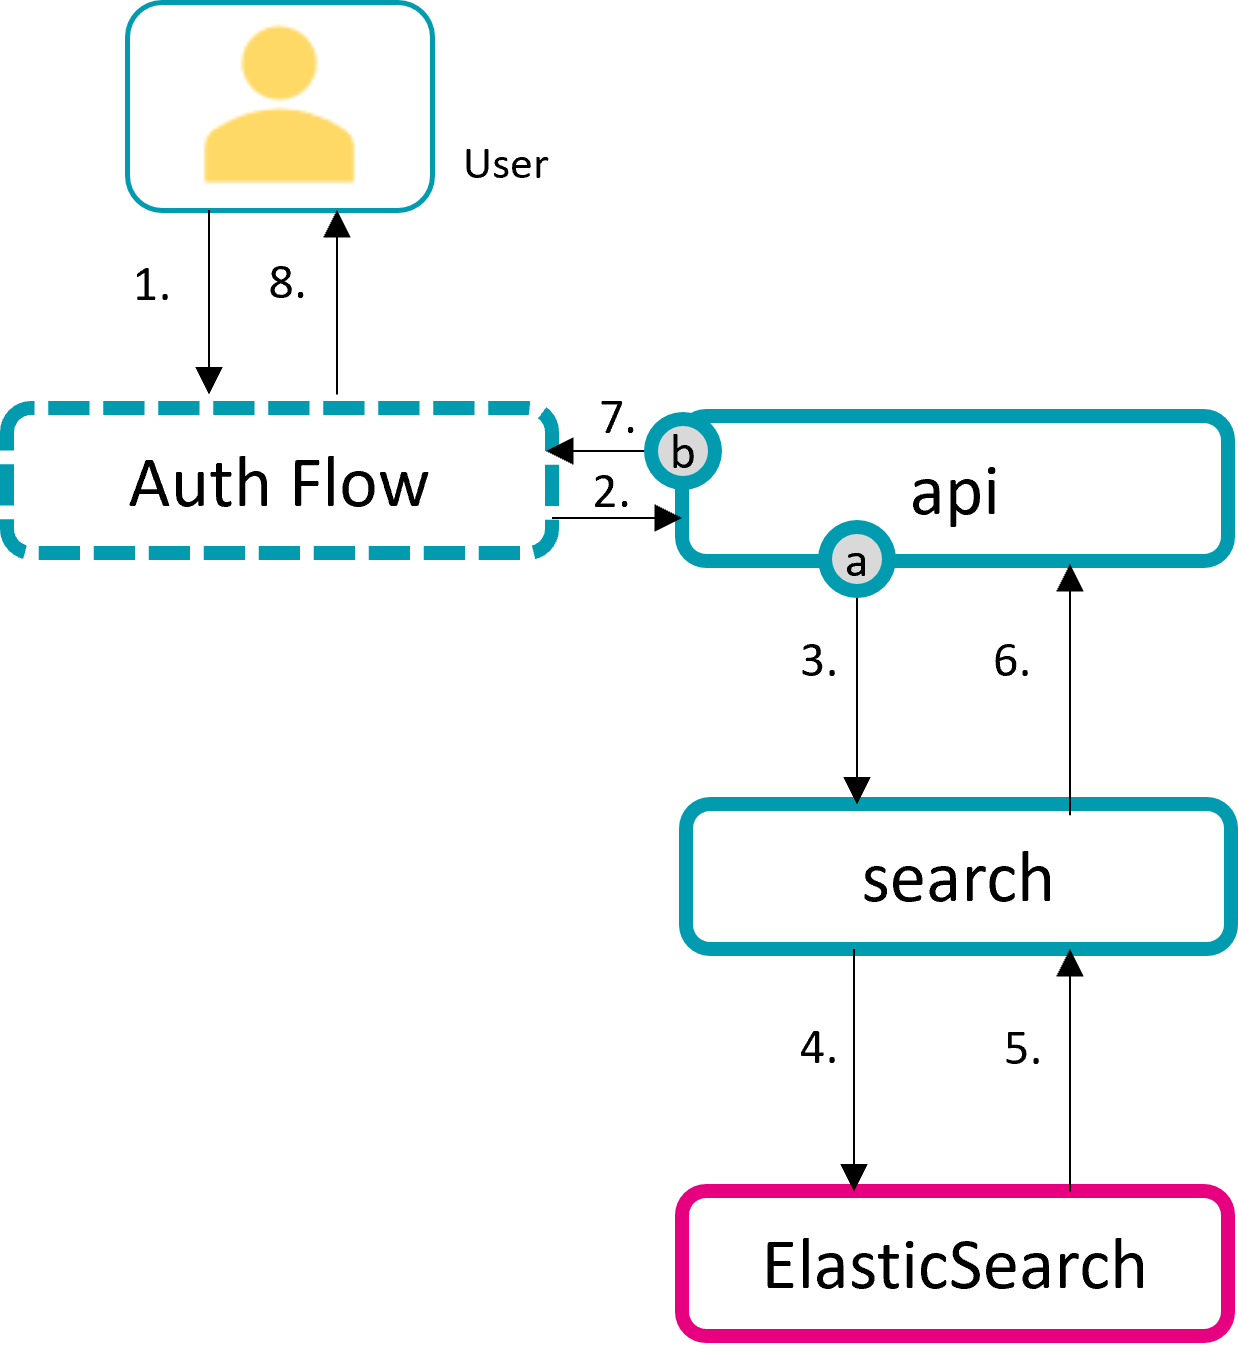 Illustration of the process steps that are passed during a search query.